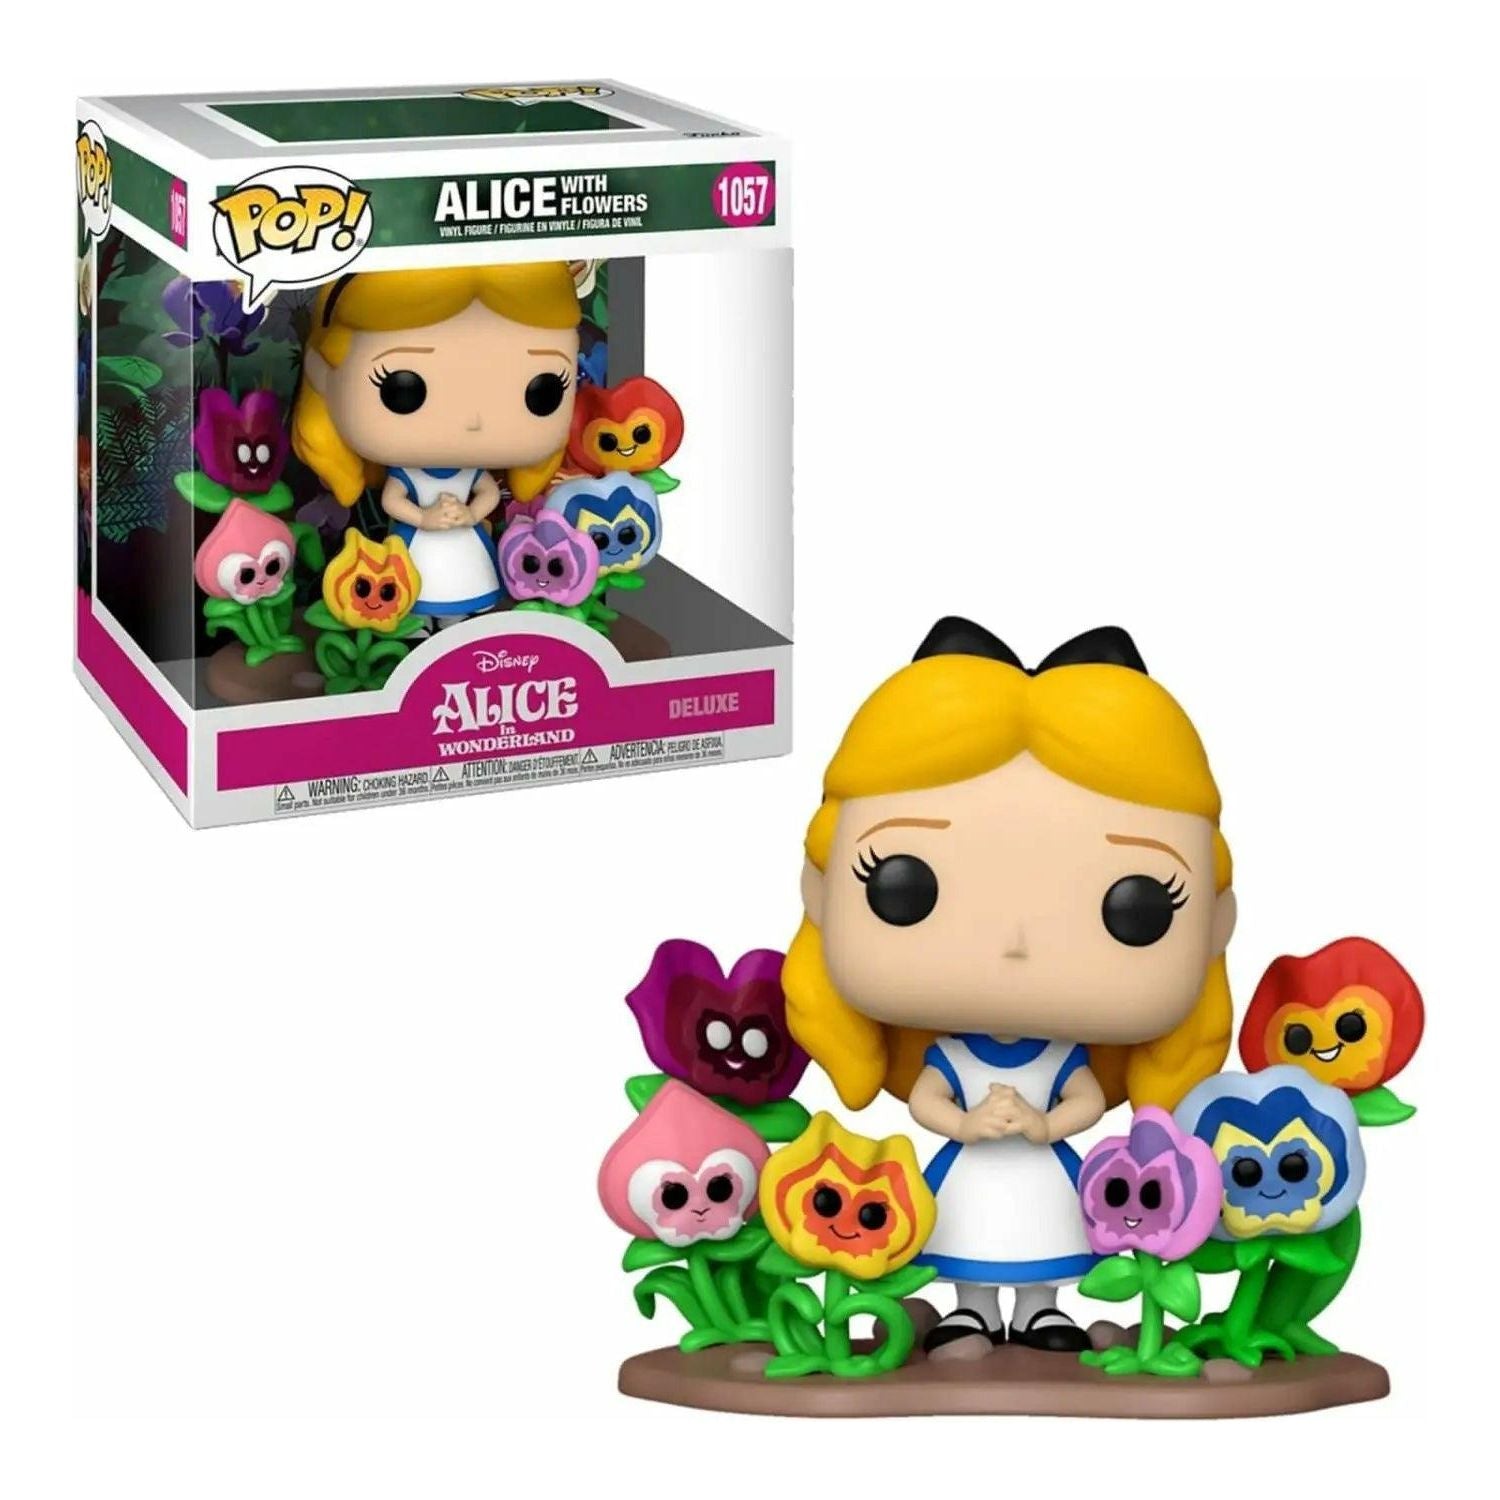 Funko Pop! Deluxe: Alice in Wonderland 70th - Alice in Wonderland with Flowers - BumbleToys - 18+, 5-7 Years, Aladdin, Fashion Dolls & Accessories, Funko, Pre-Order